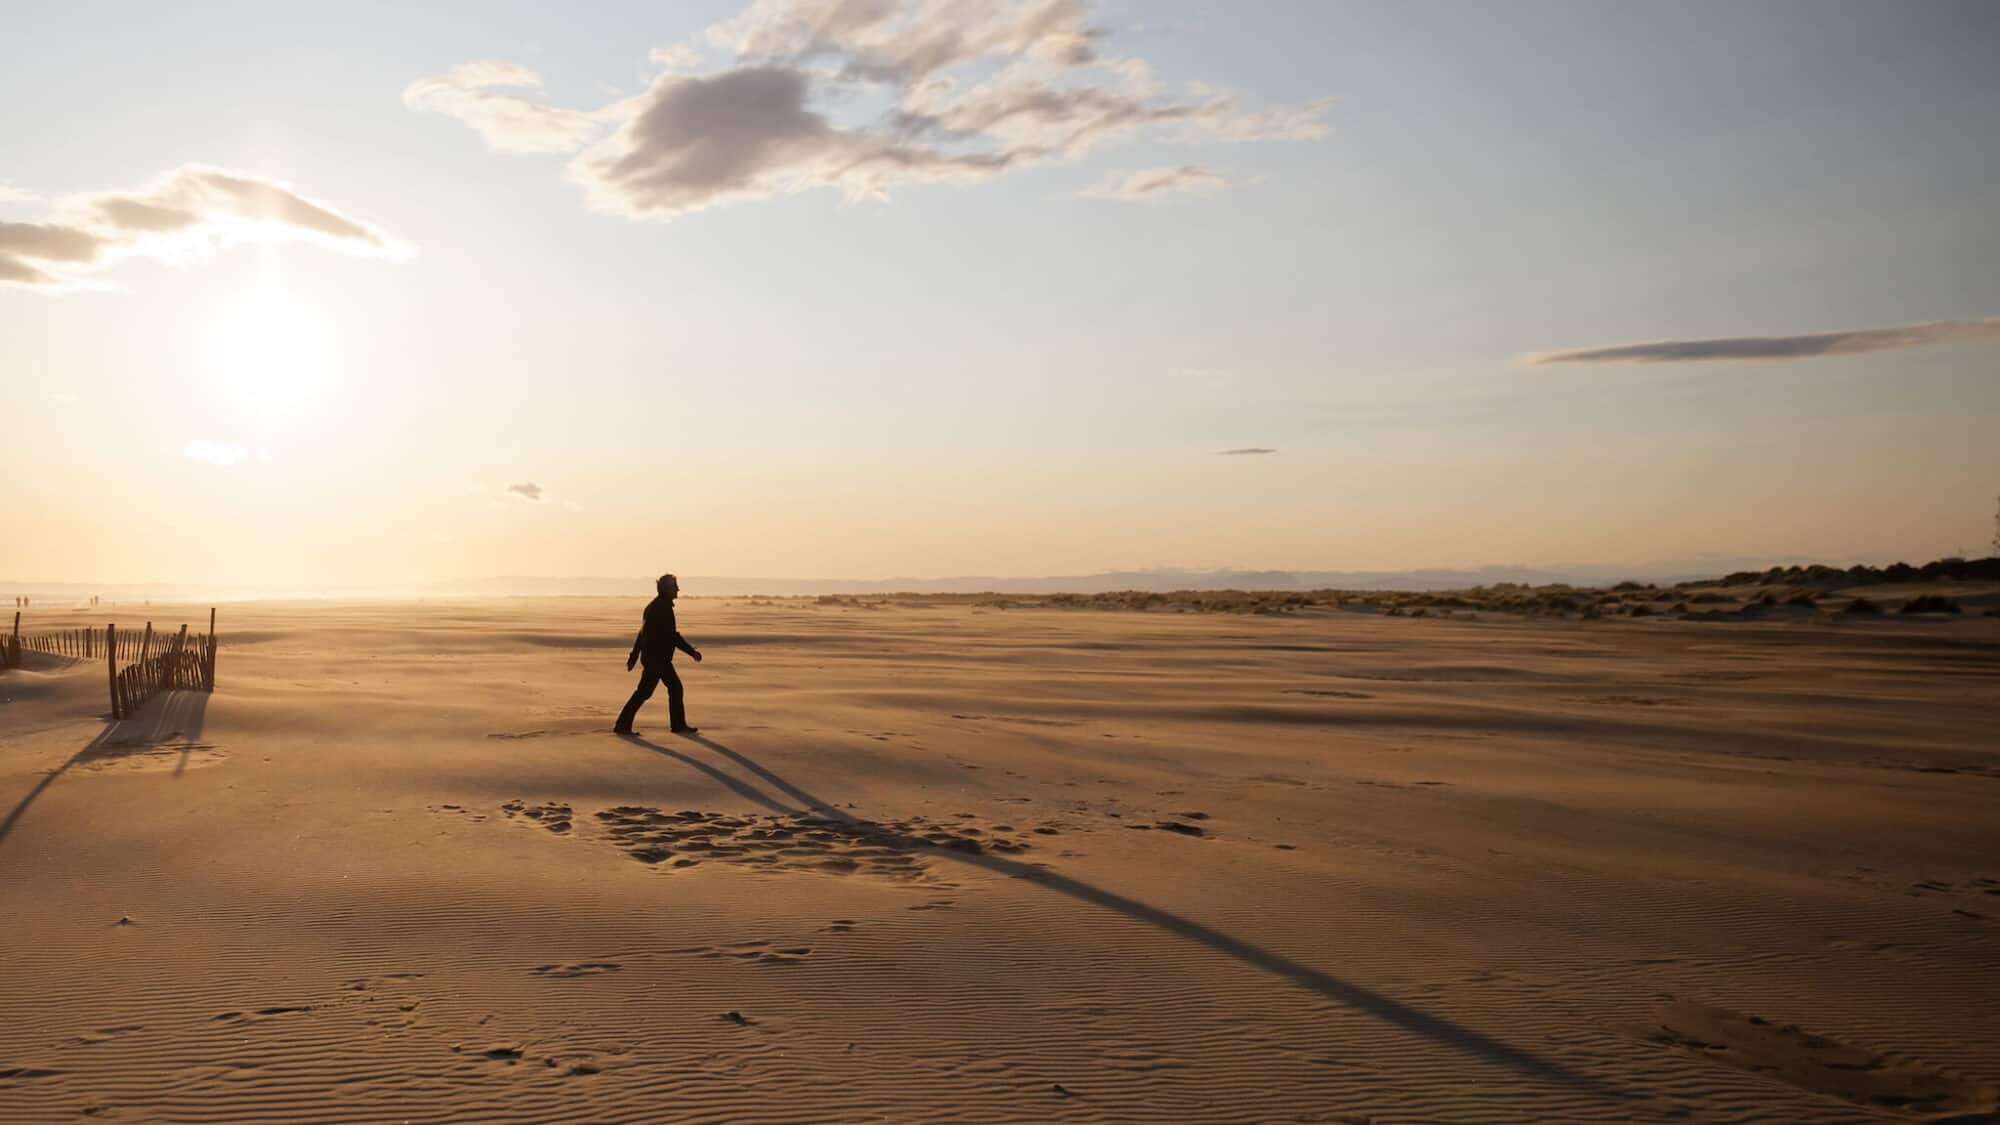 A person walks on the sandy beach of the Camargue at sunset, casting a shadow on the ground.